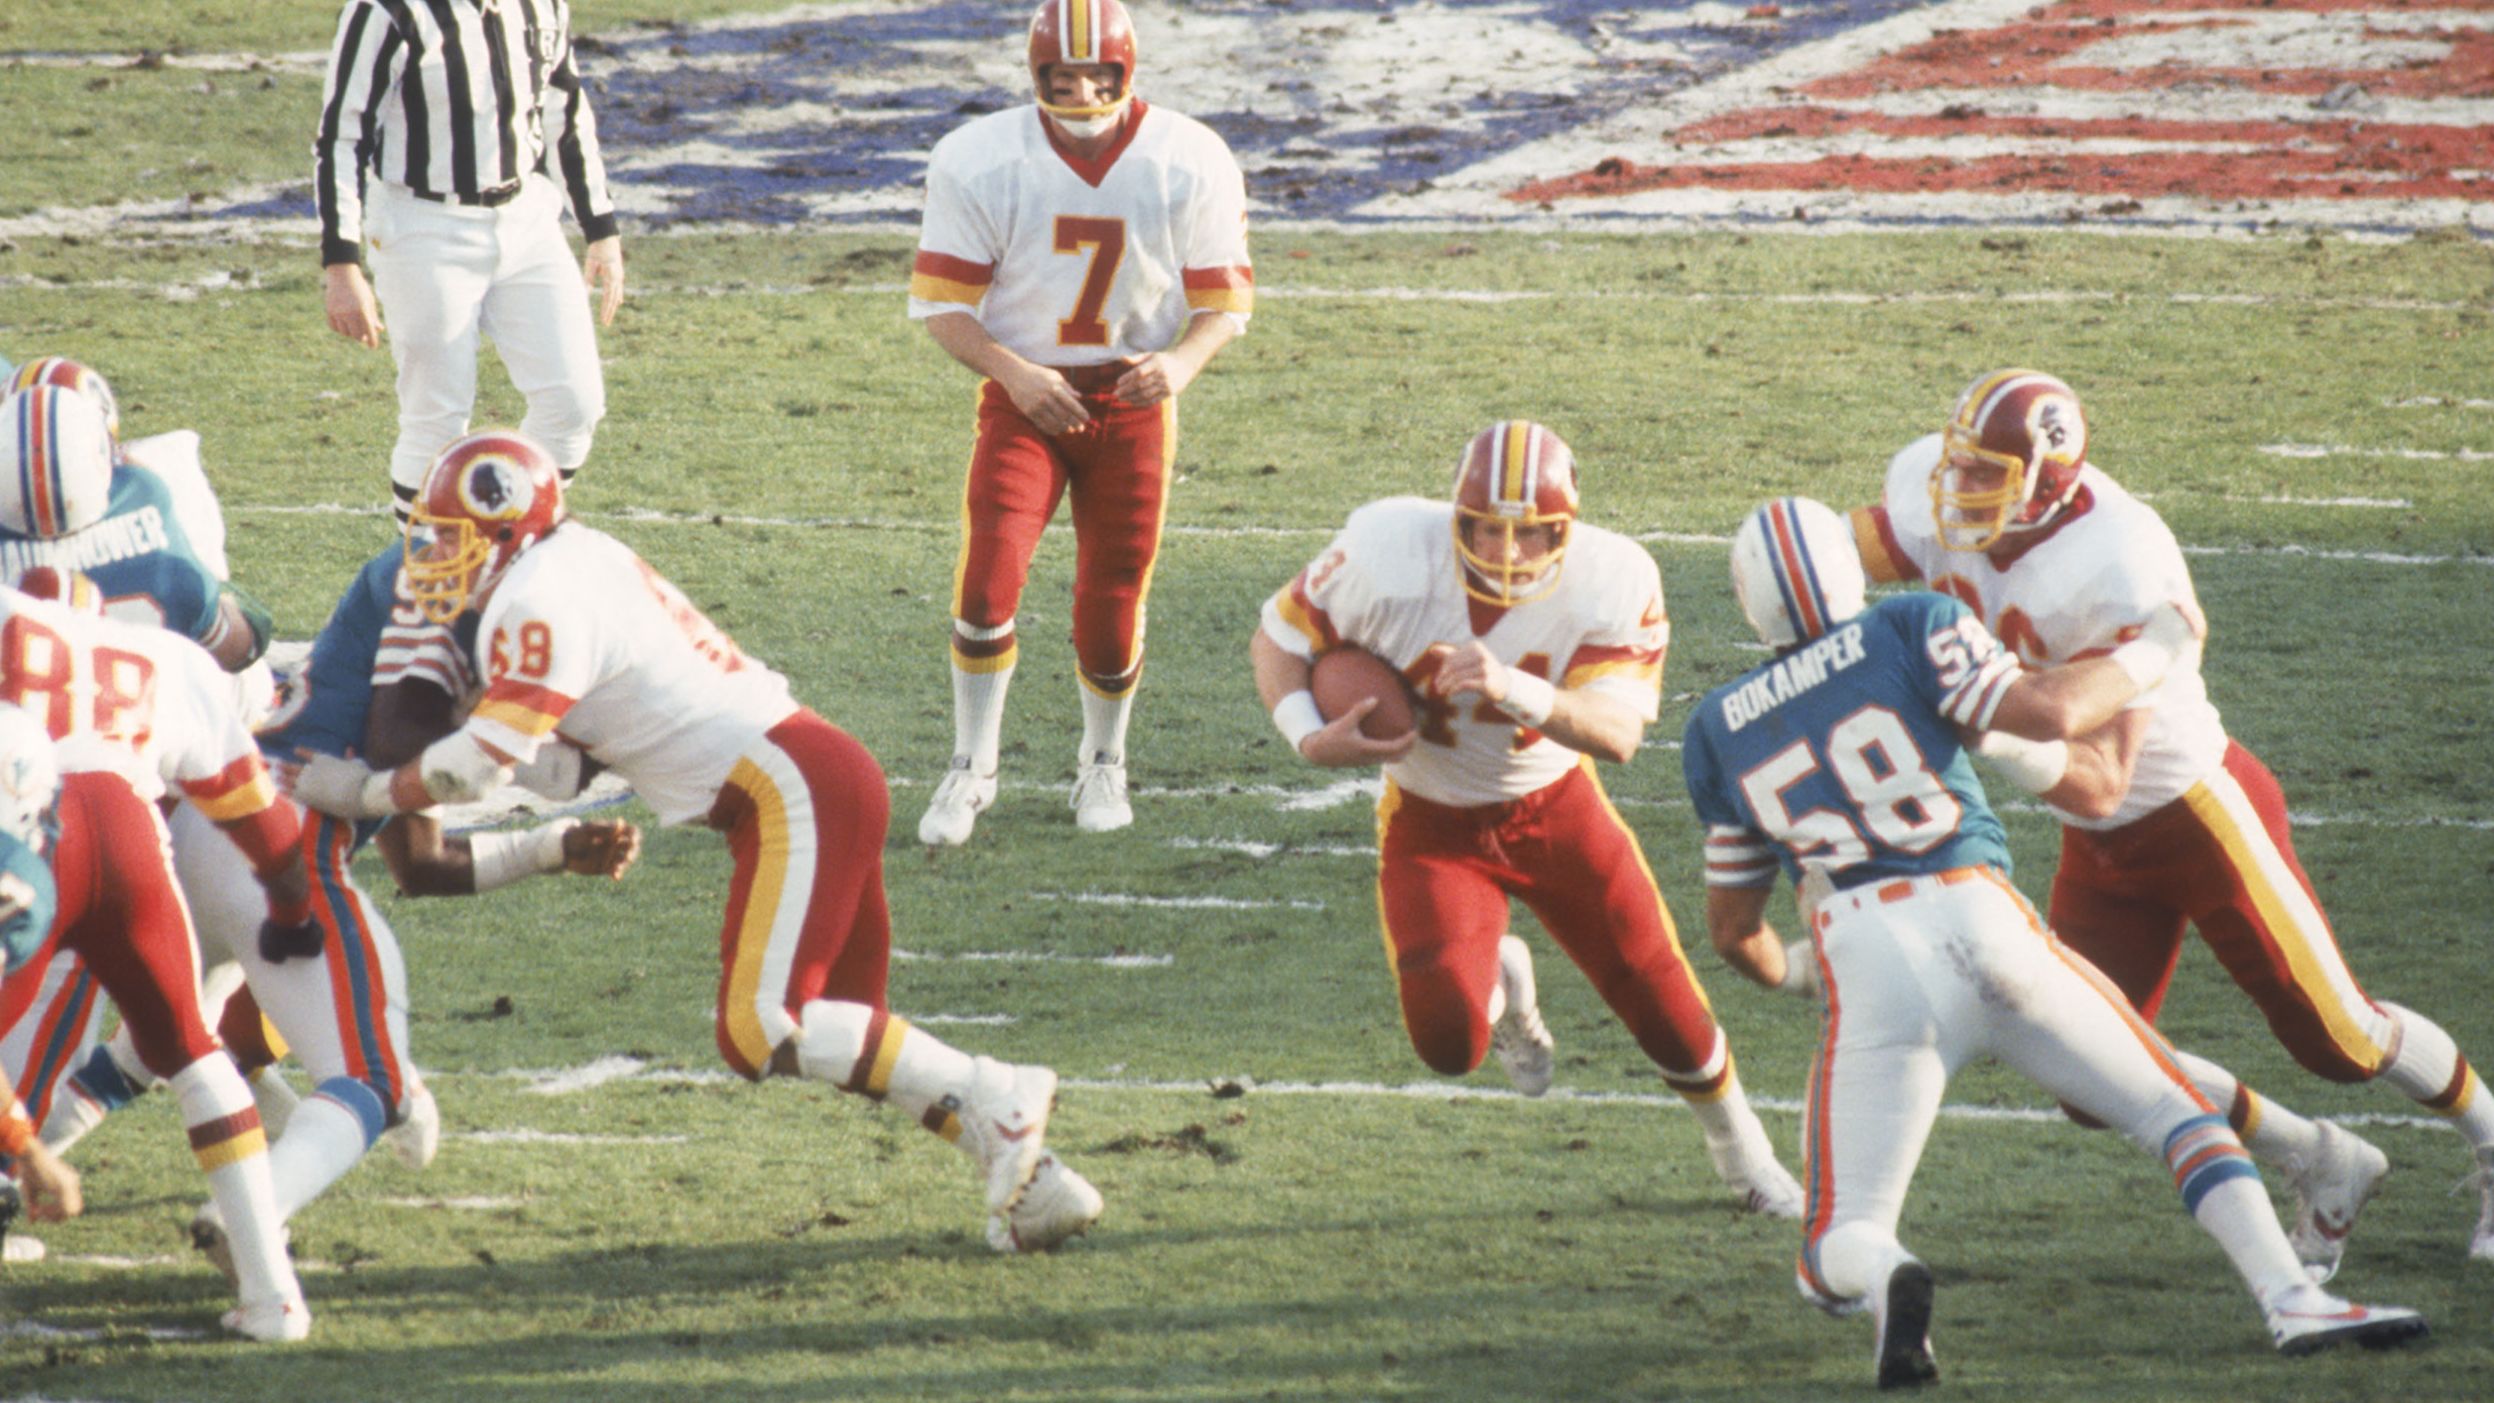 <strong>Super Bowl XVII (1983):</strong> Washington running back John Riggins bursts through a hole during the Redskins' 27-17 victory over Miami in Super Bowl XVII. Riggins was named MVP after rushing for 166 yards and a touchdown.